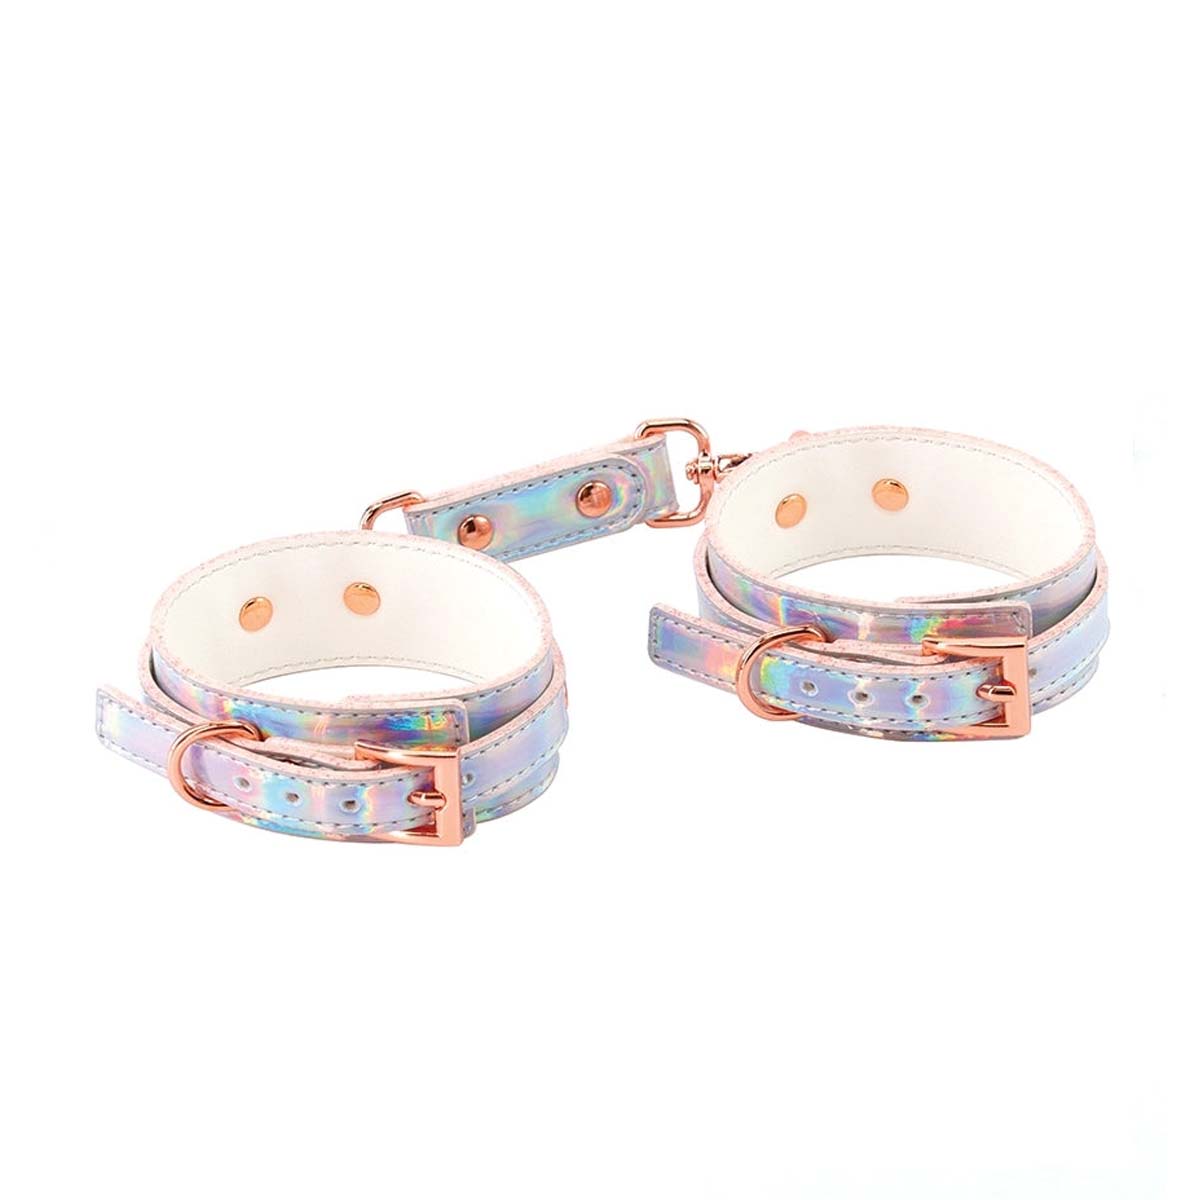 Vinyl holographic rainbow wrists cuffs Nudie Co